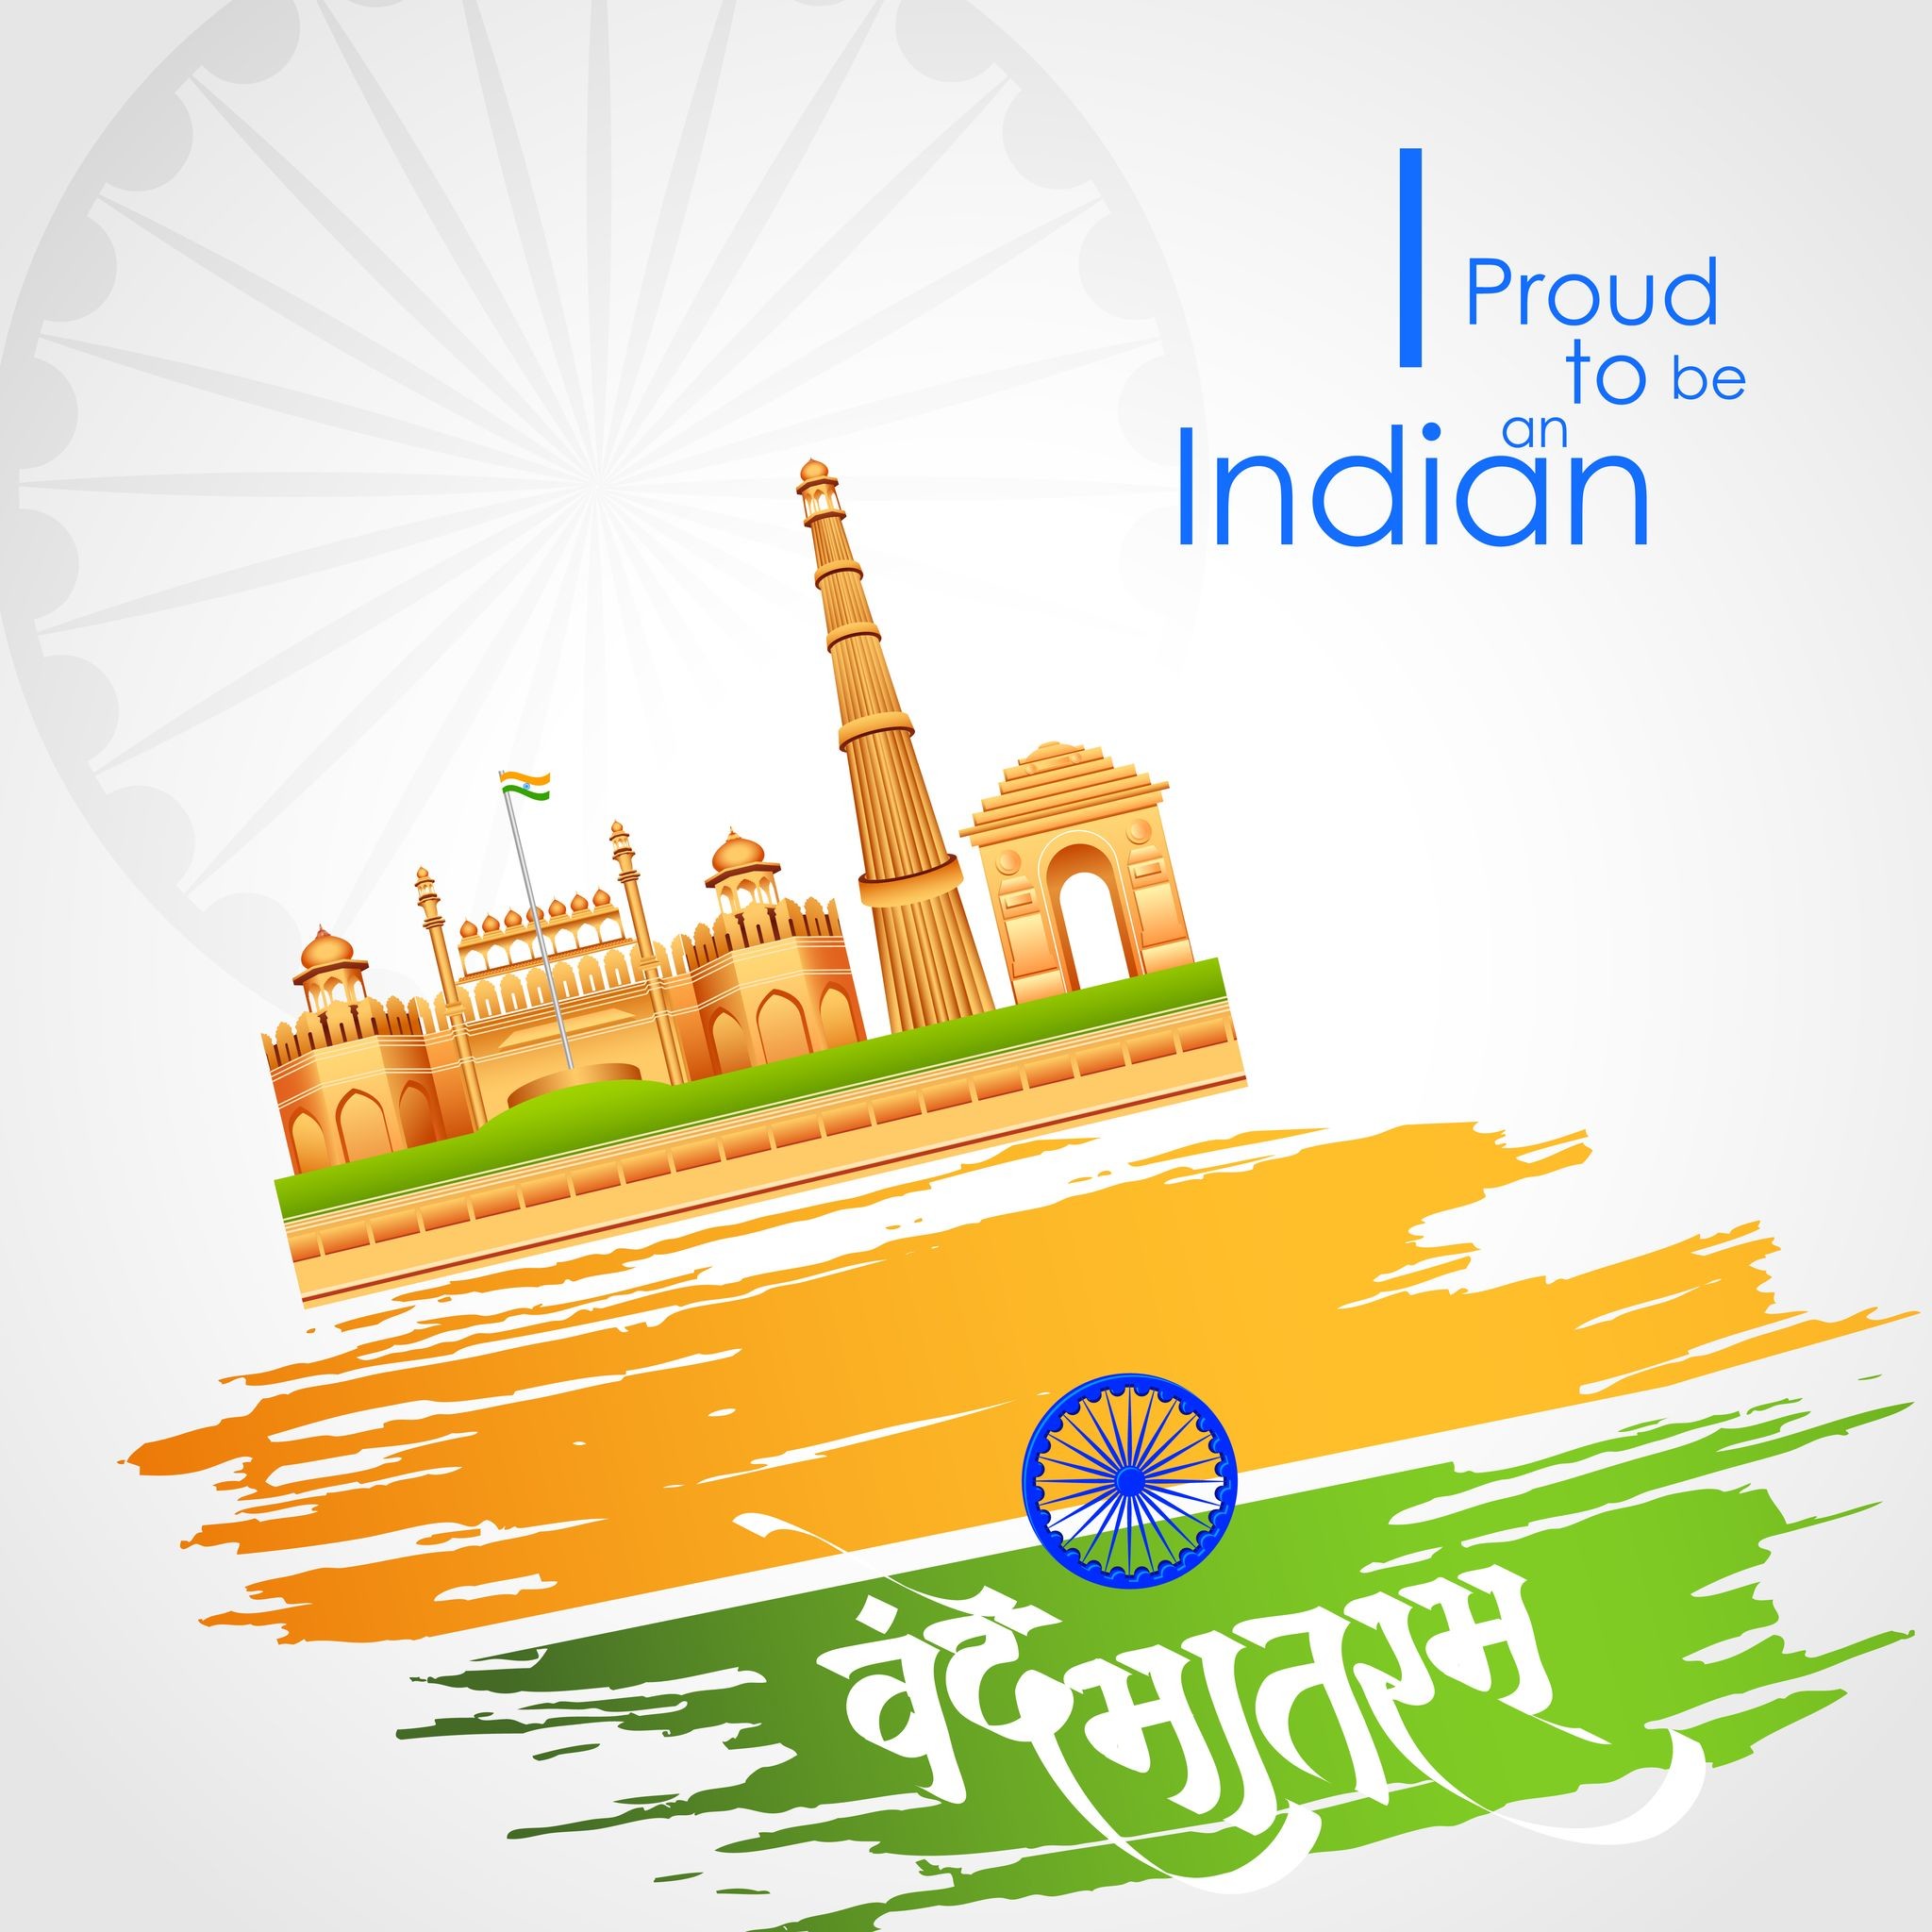 Indian Flag, Indian Independence Day, High Quality Images, Hd Wallpaper,  Wallpapers, Tips, Android, Scrap